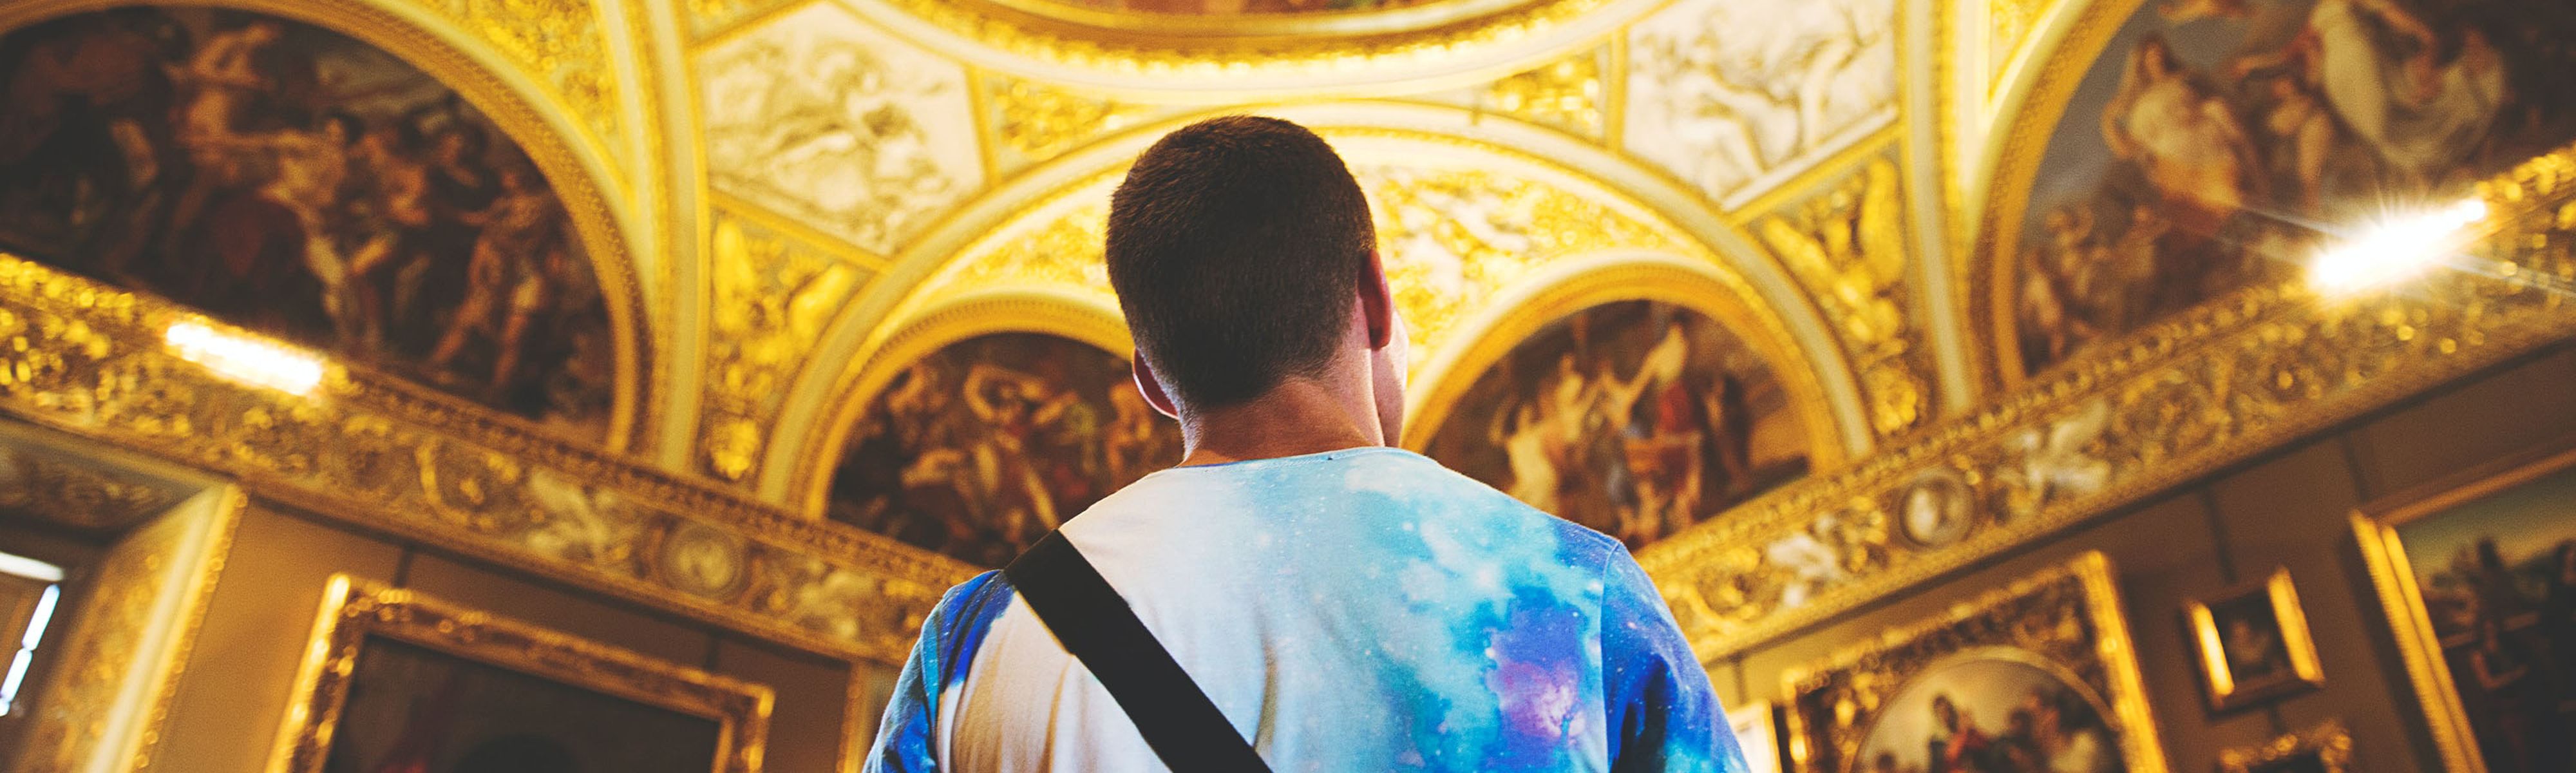 man looking up at gold painted ceiling in a basilica in florence italy